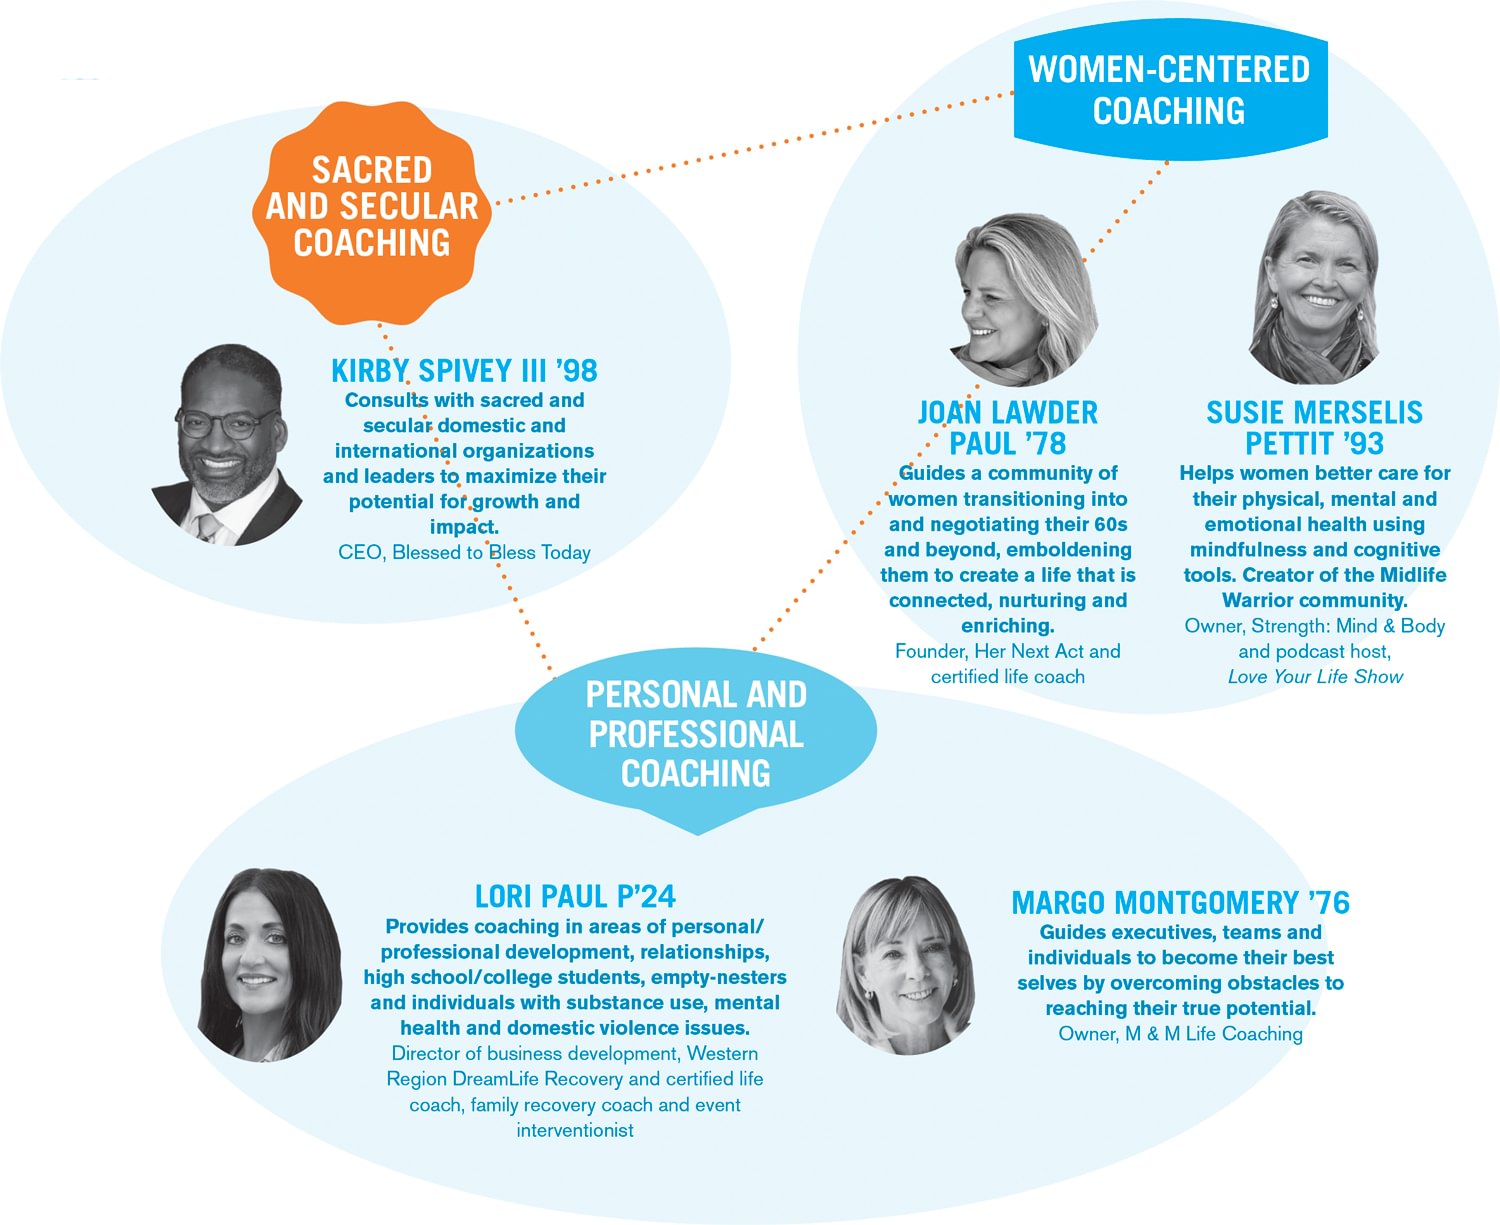 Infographic detailing sacred and secular coaching, women-centered coaching, and personal and professional coaching